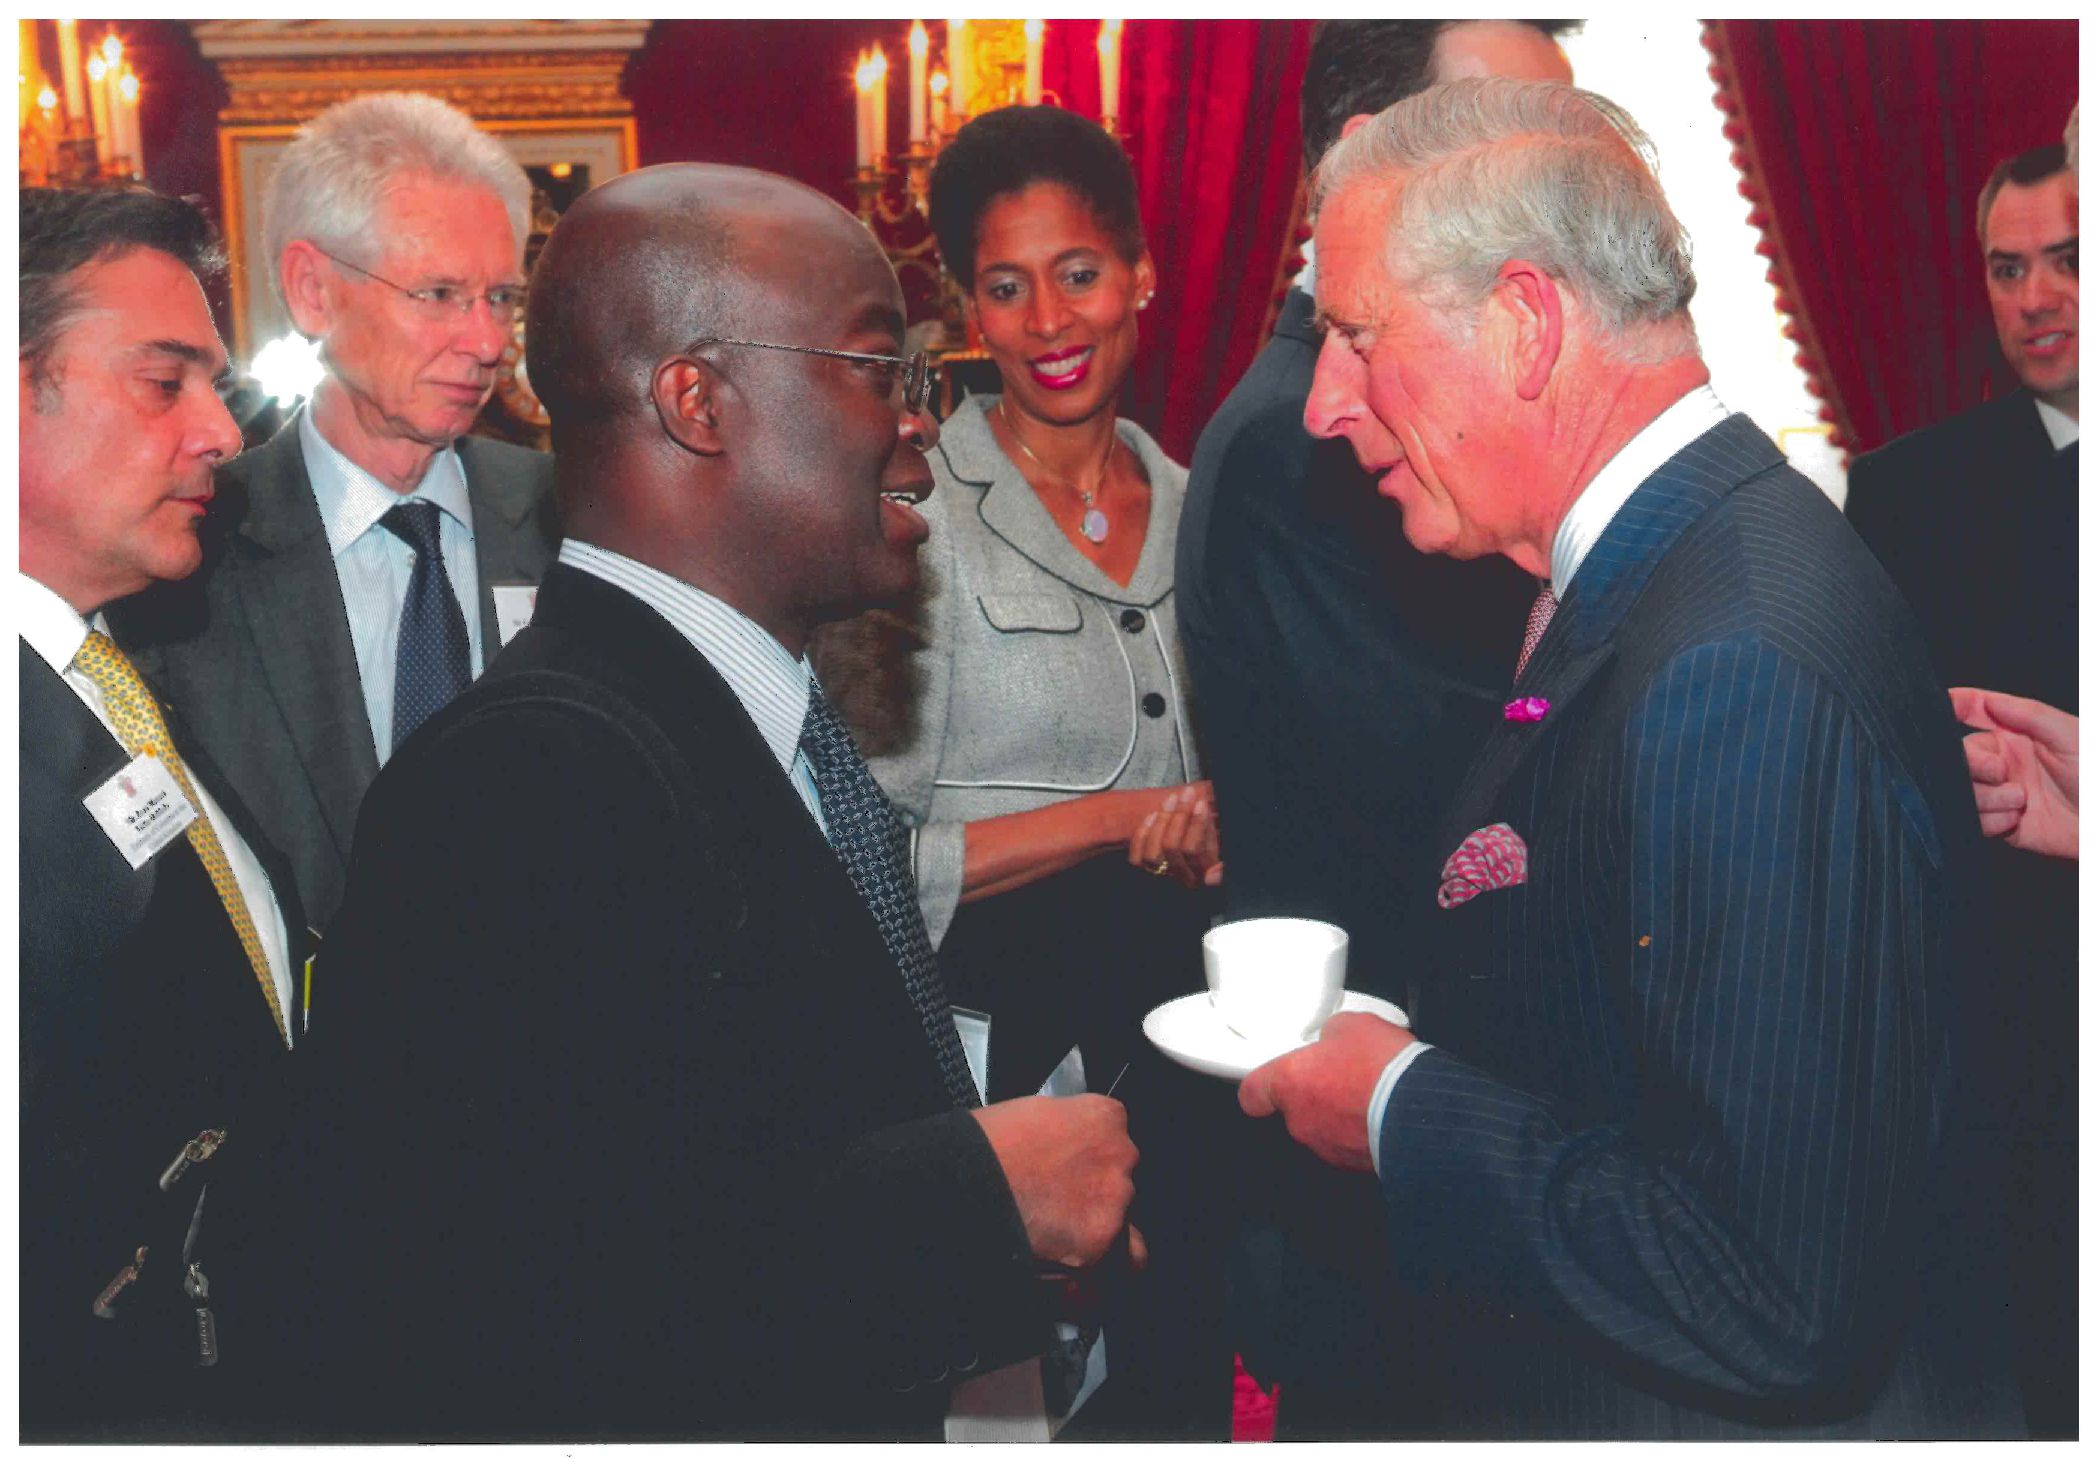 Dr. Sumaila meets with Prince Charles at St. James Palace in March 2011. (Photo courtesy of R. Sumaila)